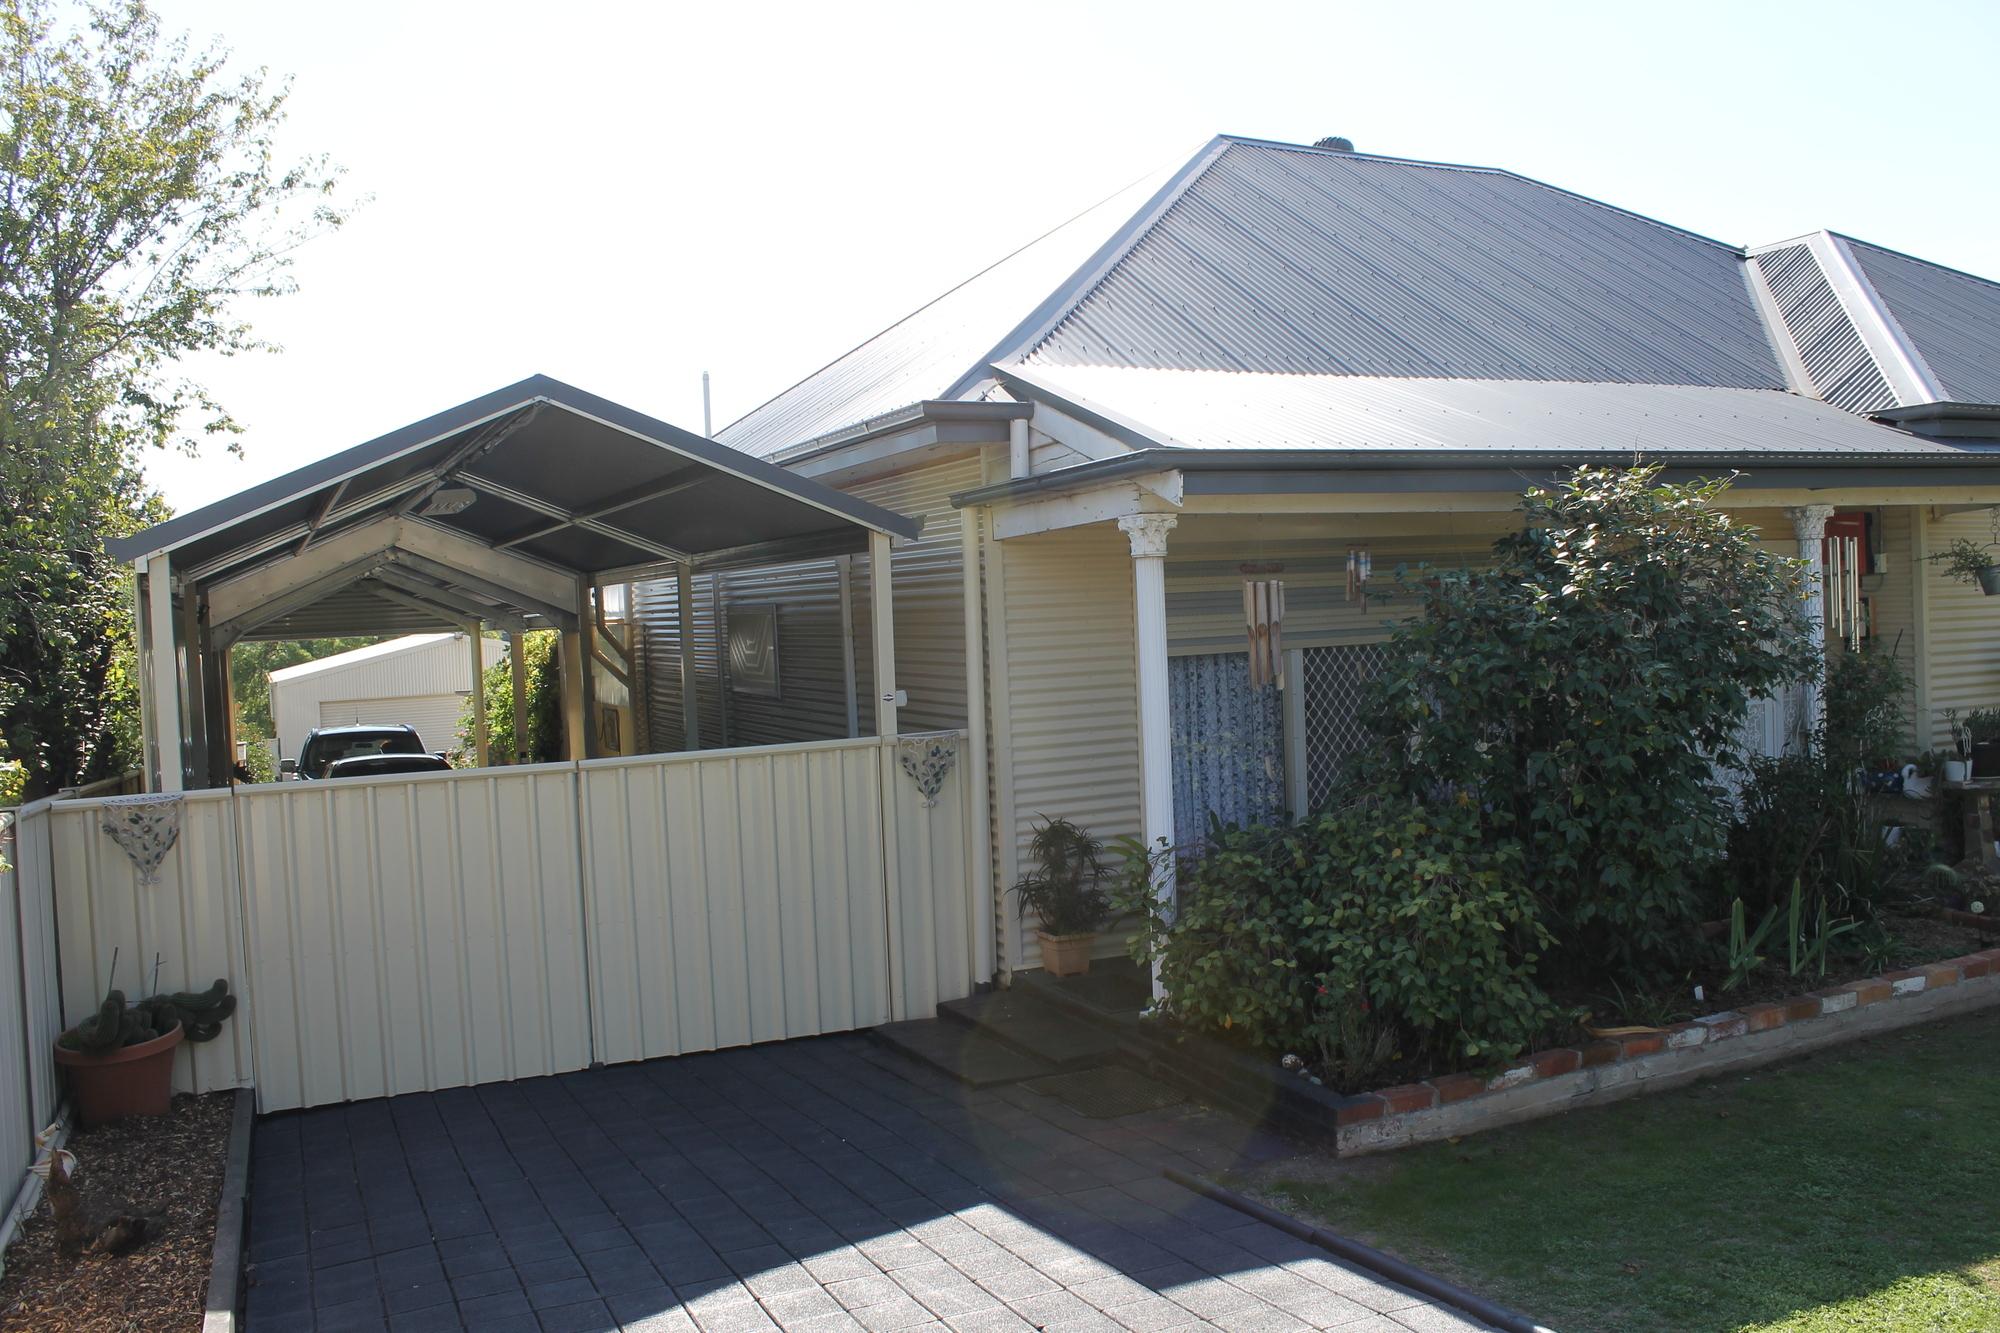 Anthony from Castlemaine, VIC loves COLORBOND® steel. Roofing, Guttering & Fascia, Garage Doors, Walling, Fencing, Sheds, Patio & Pergola made from COLORBOND® steel in colour Classic Cream™, Woodland Grey® and Basalt® Matt